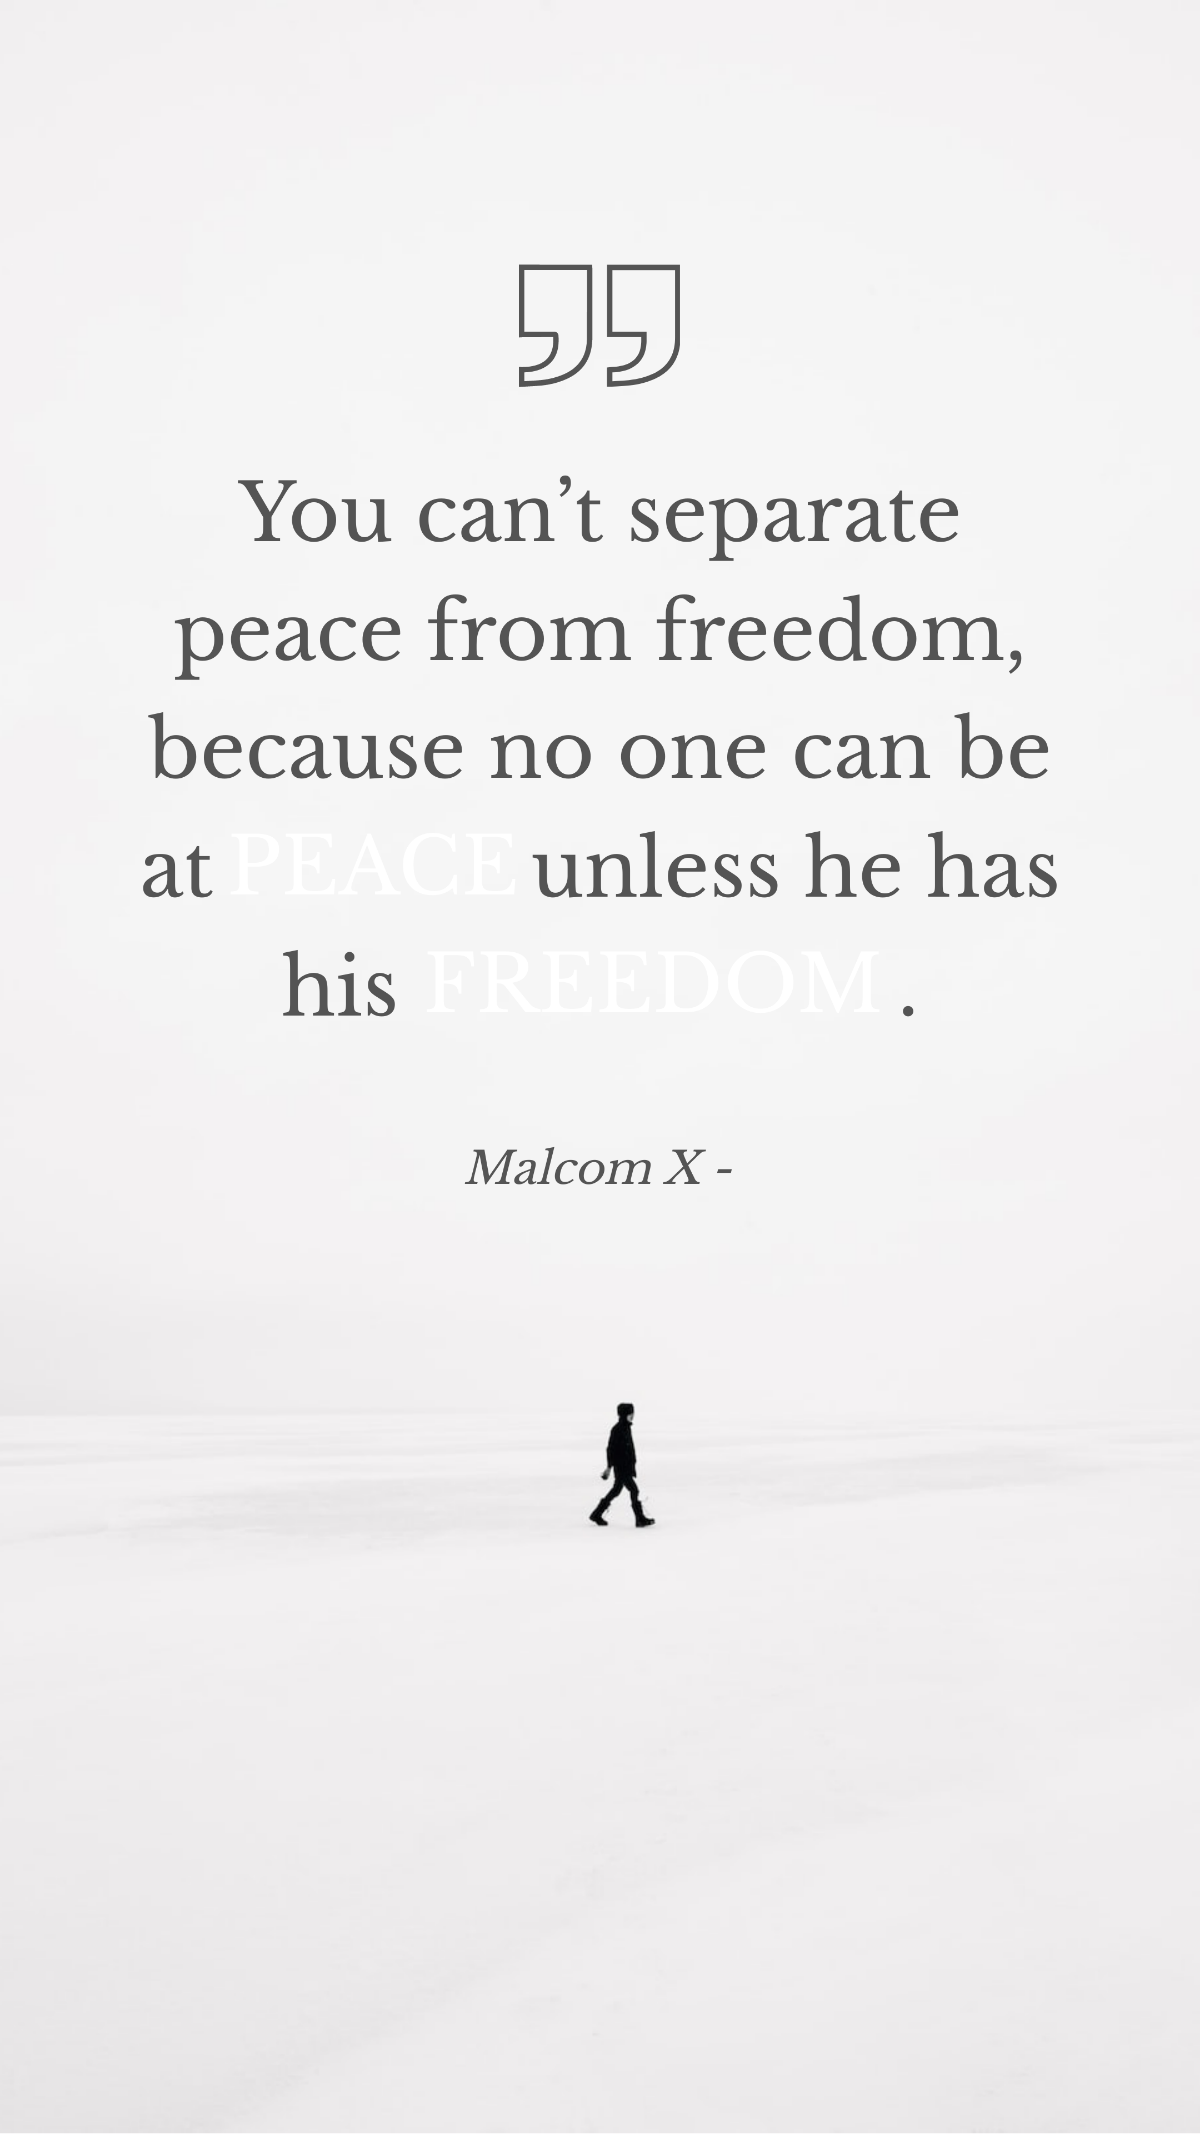 Malcom X - You can’t separate peace from freedom, because no one can be at peace unless he has his freedom.